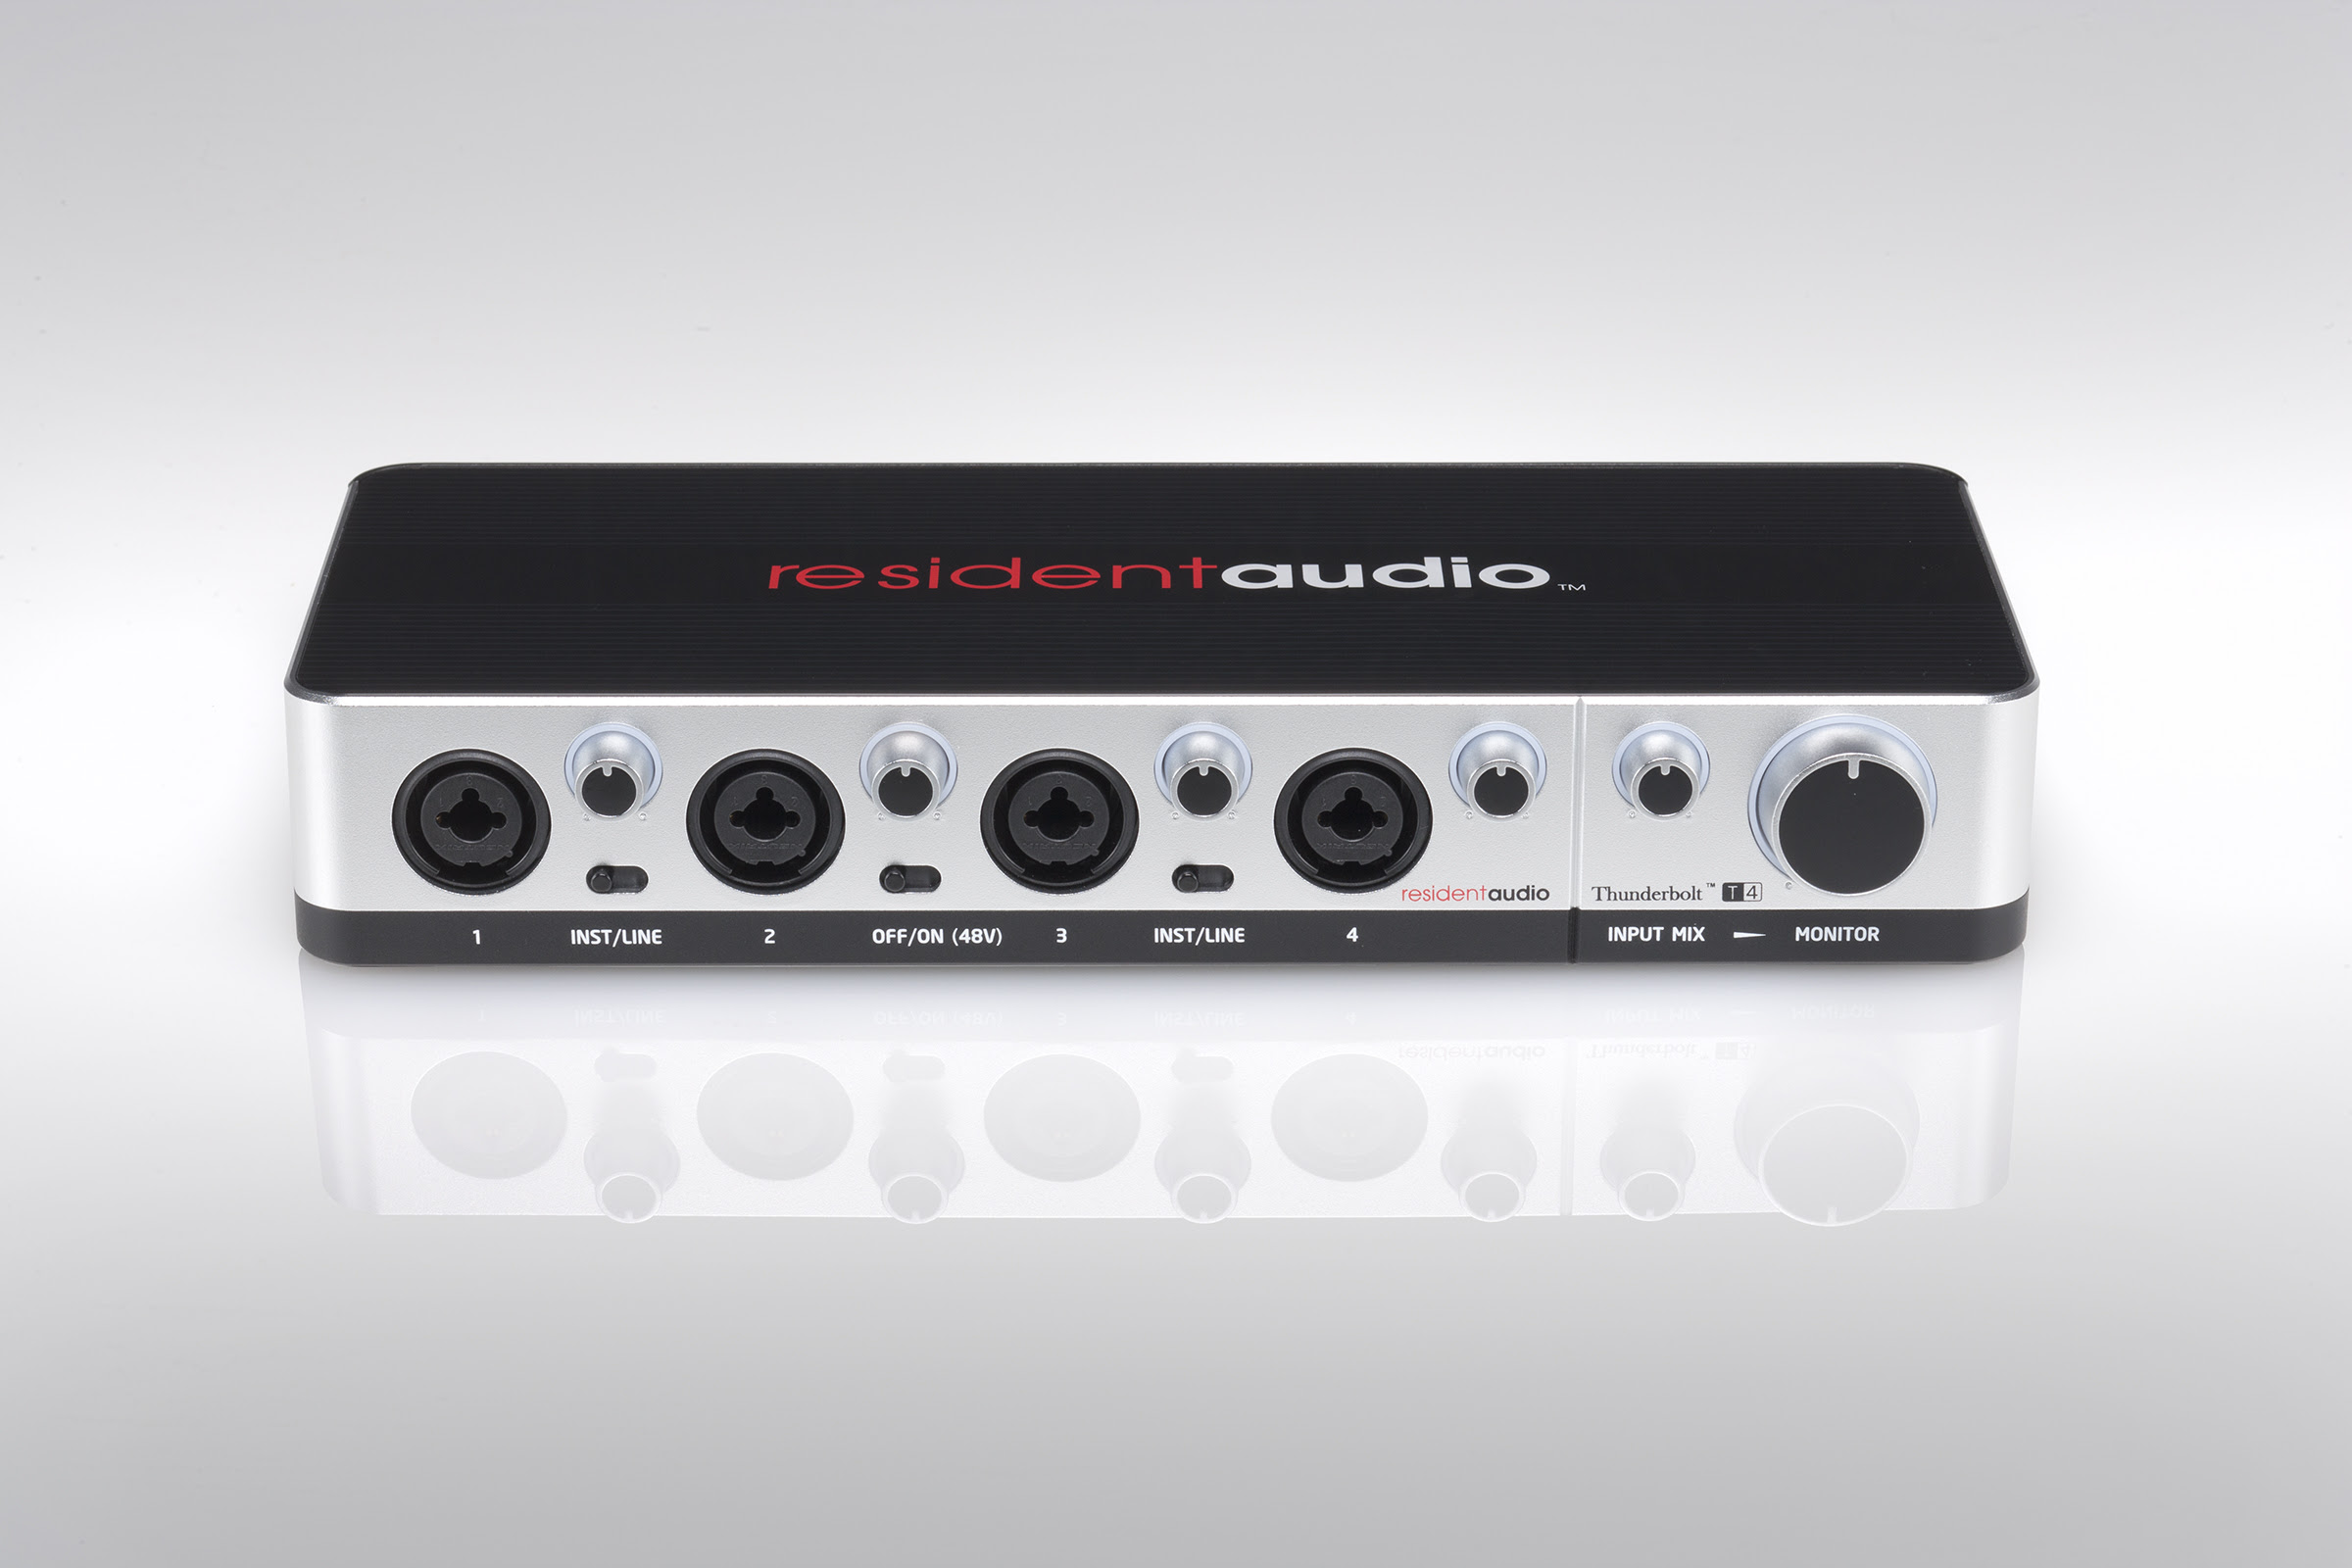 Resident Audio Debuts with World’s First Bus-Powered Multichannel Thunderbolt® Interface